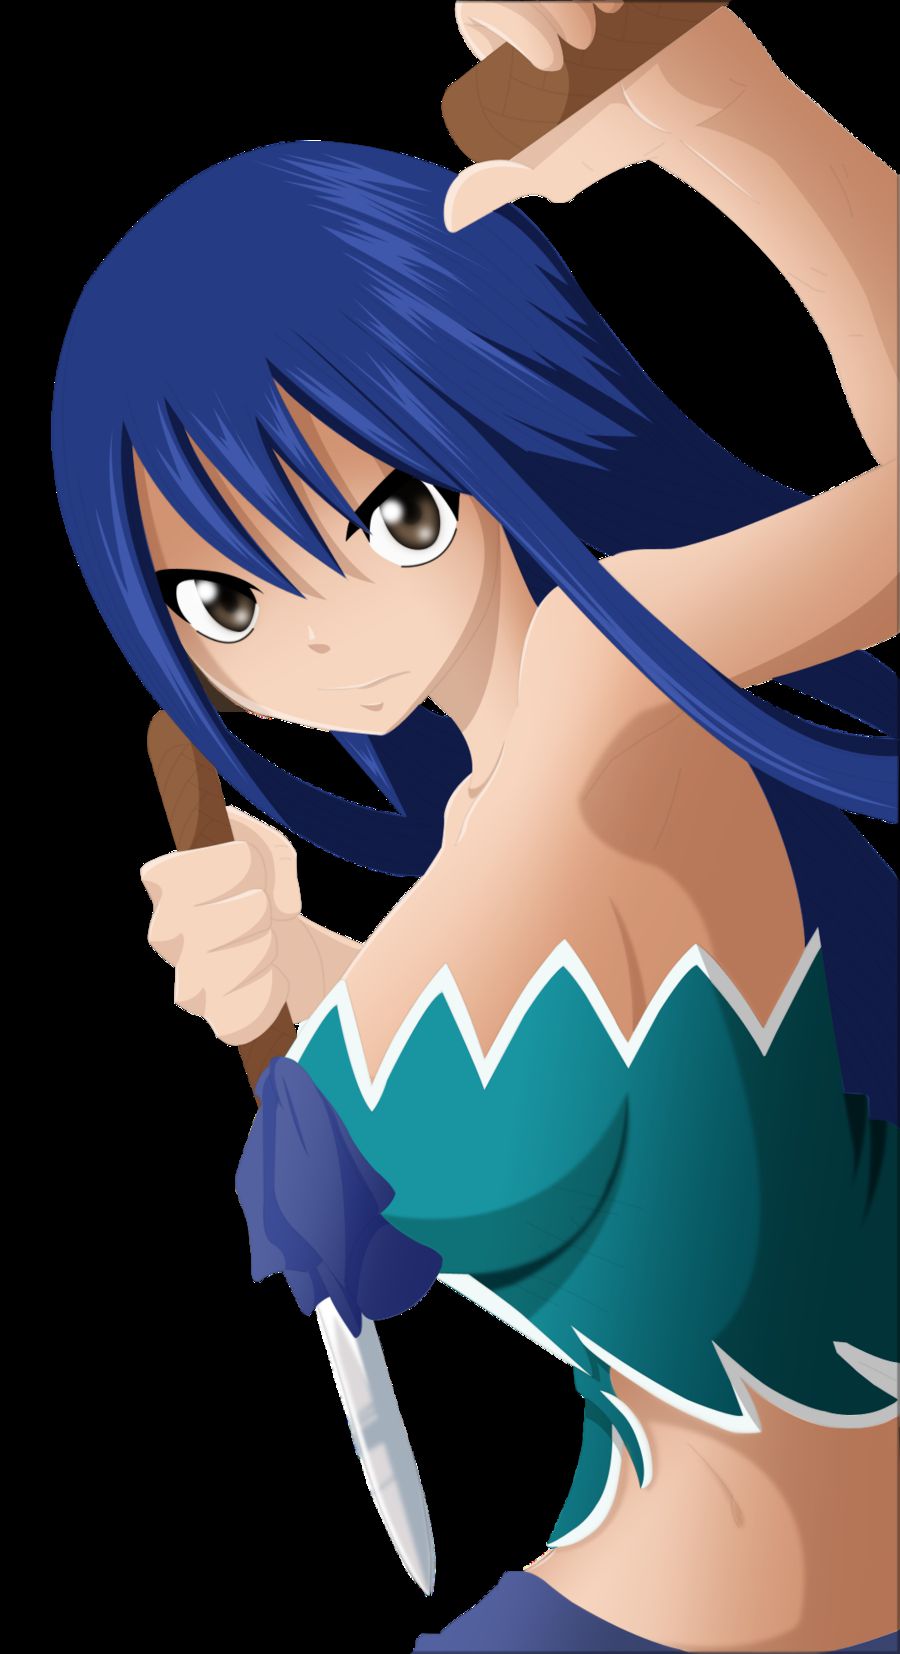 Fairy Tail Girls Gallery 82